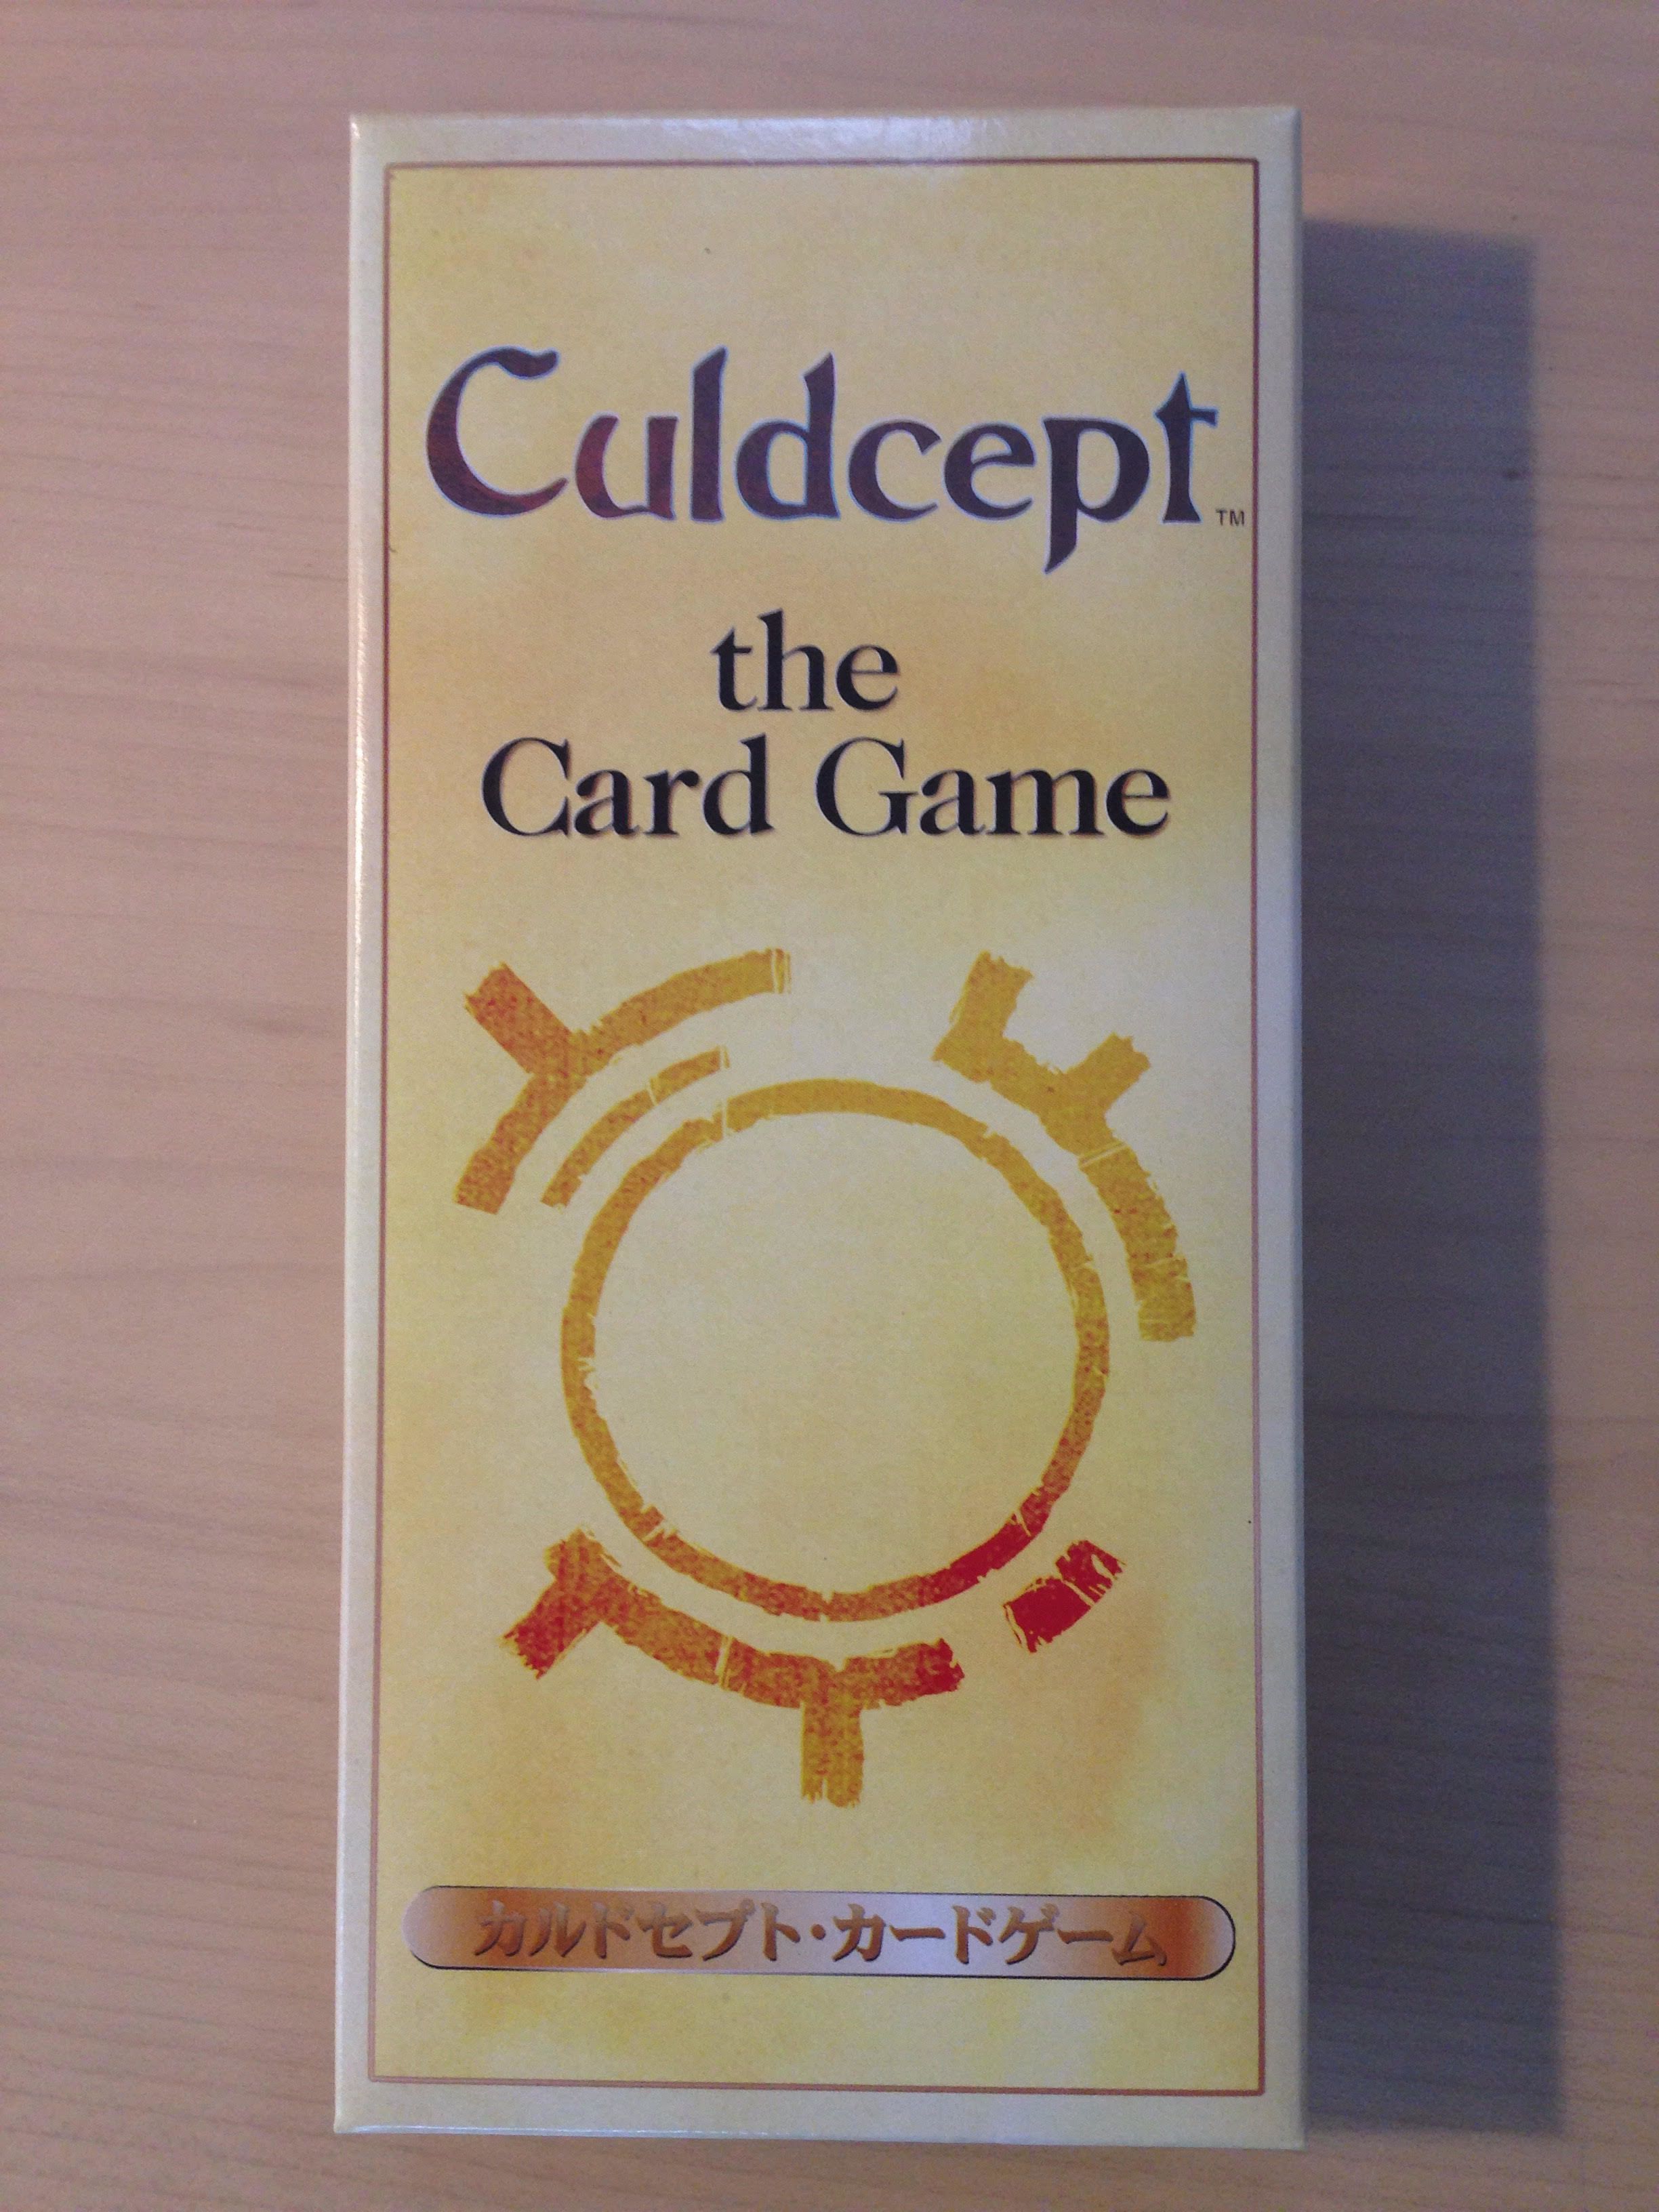 Culdcept: The Card Game